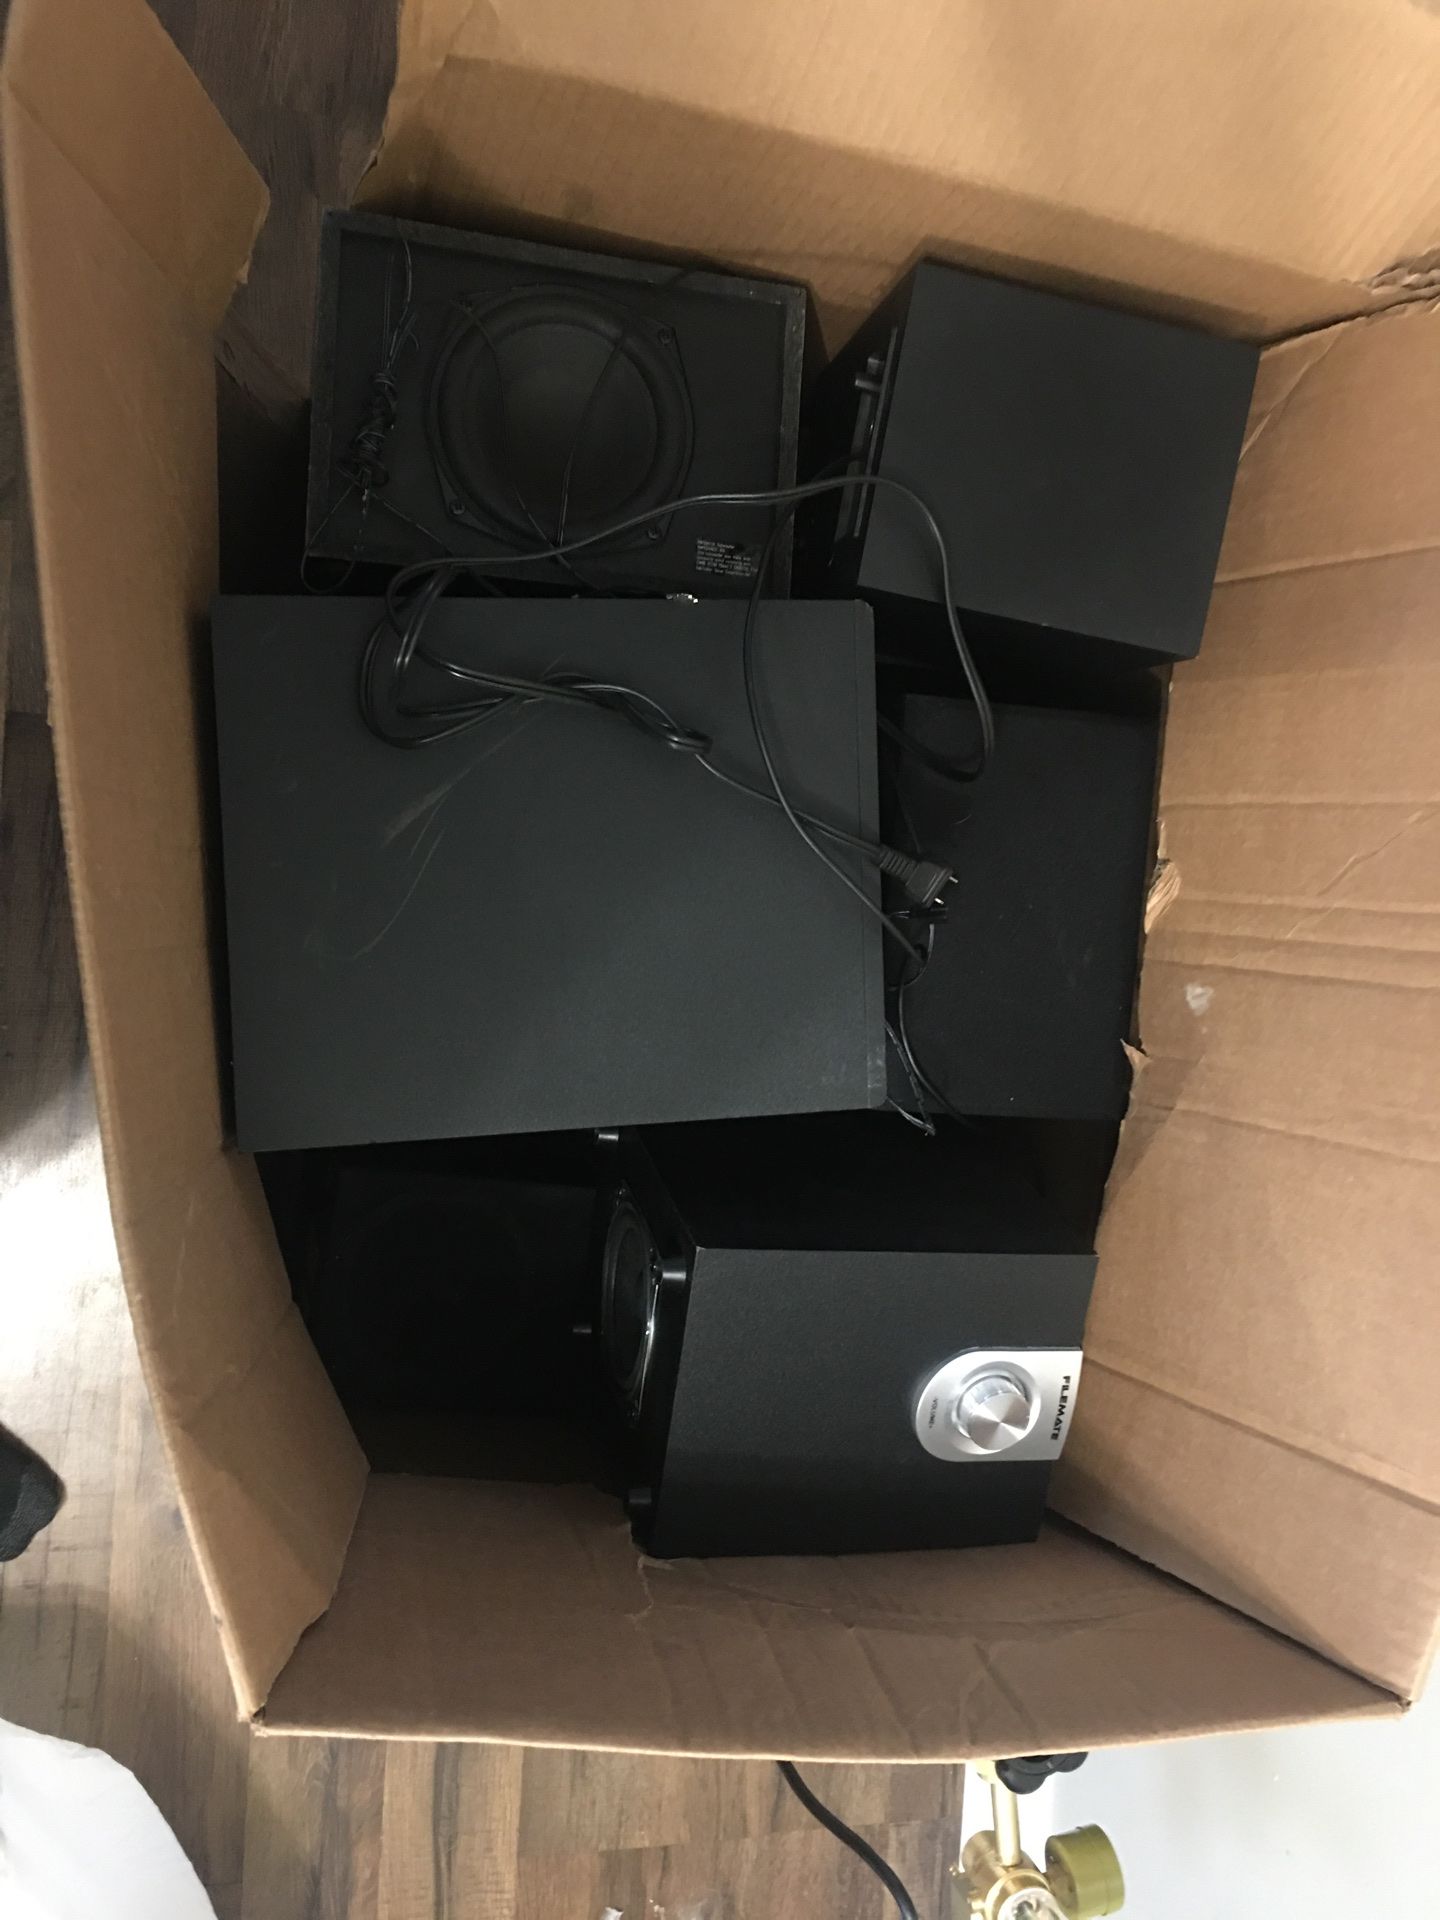 Box of old speakers